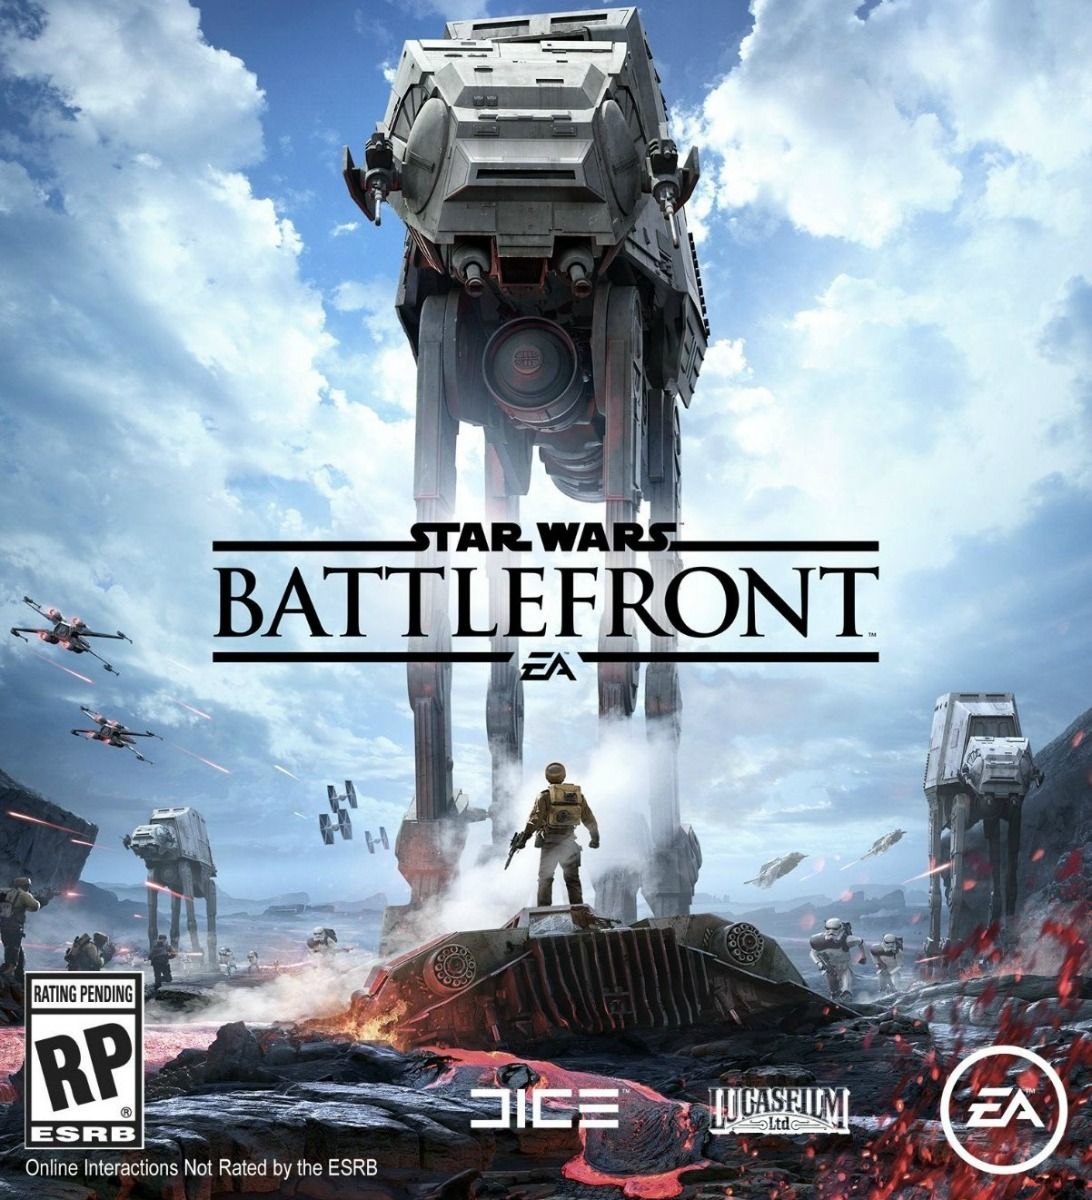 Battlefront - The Complete Guide to The Force Awakens’s Backstory